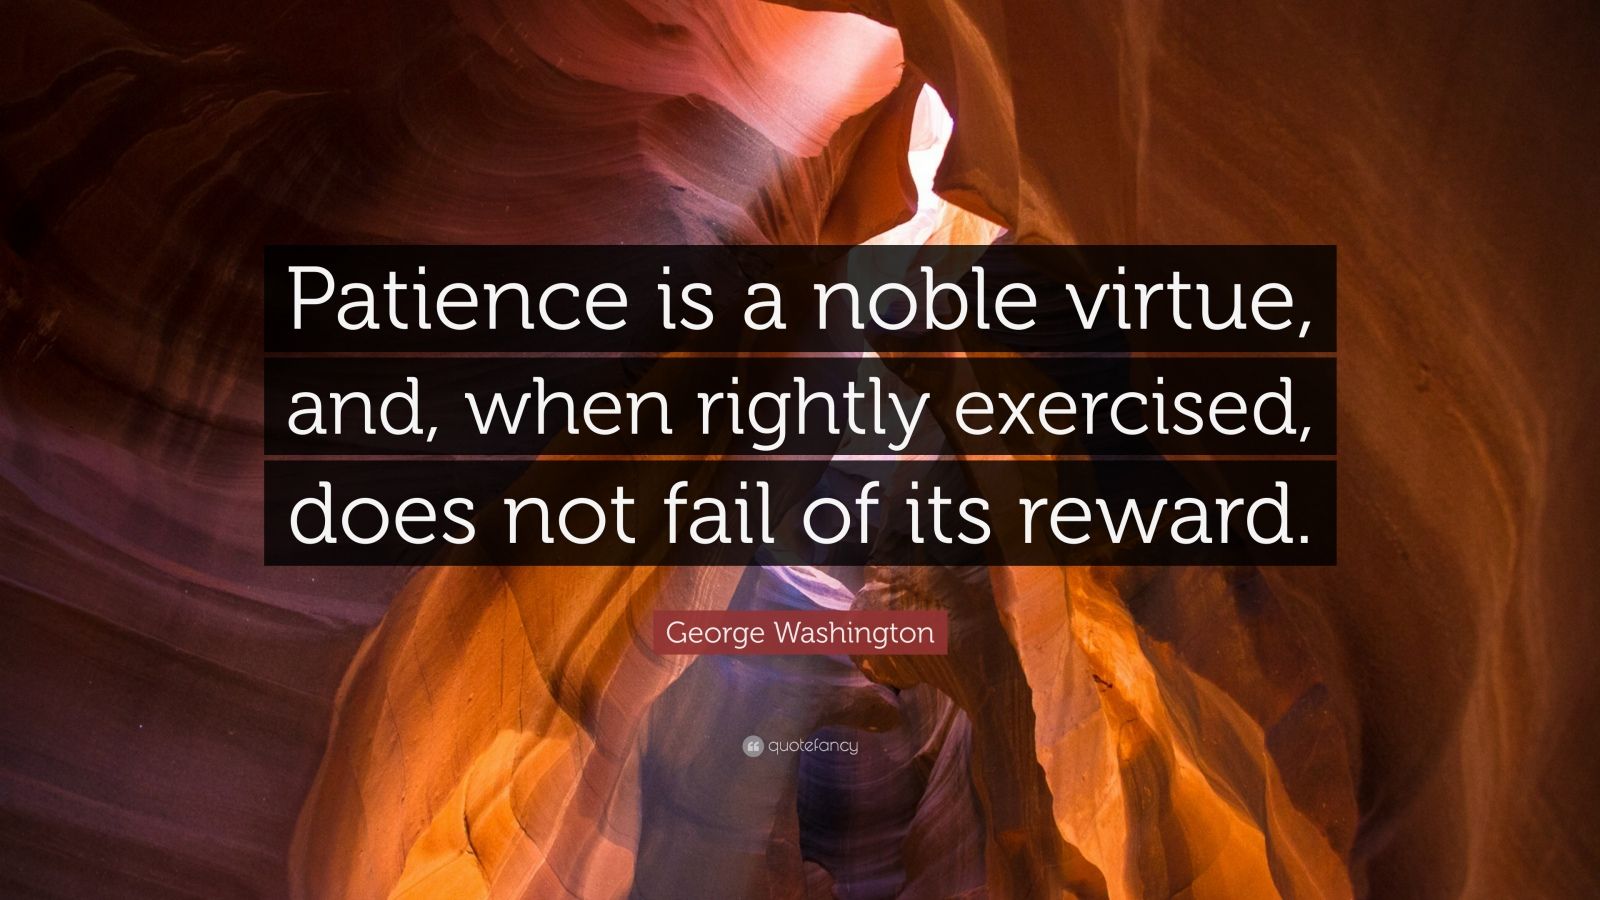 George Washington Quote: “Patience is a noble virtue, and, when rightly ...